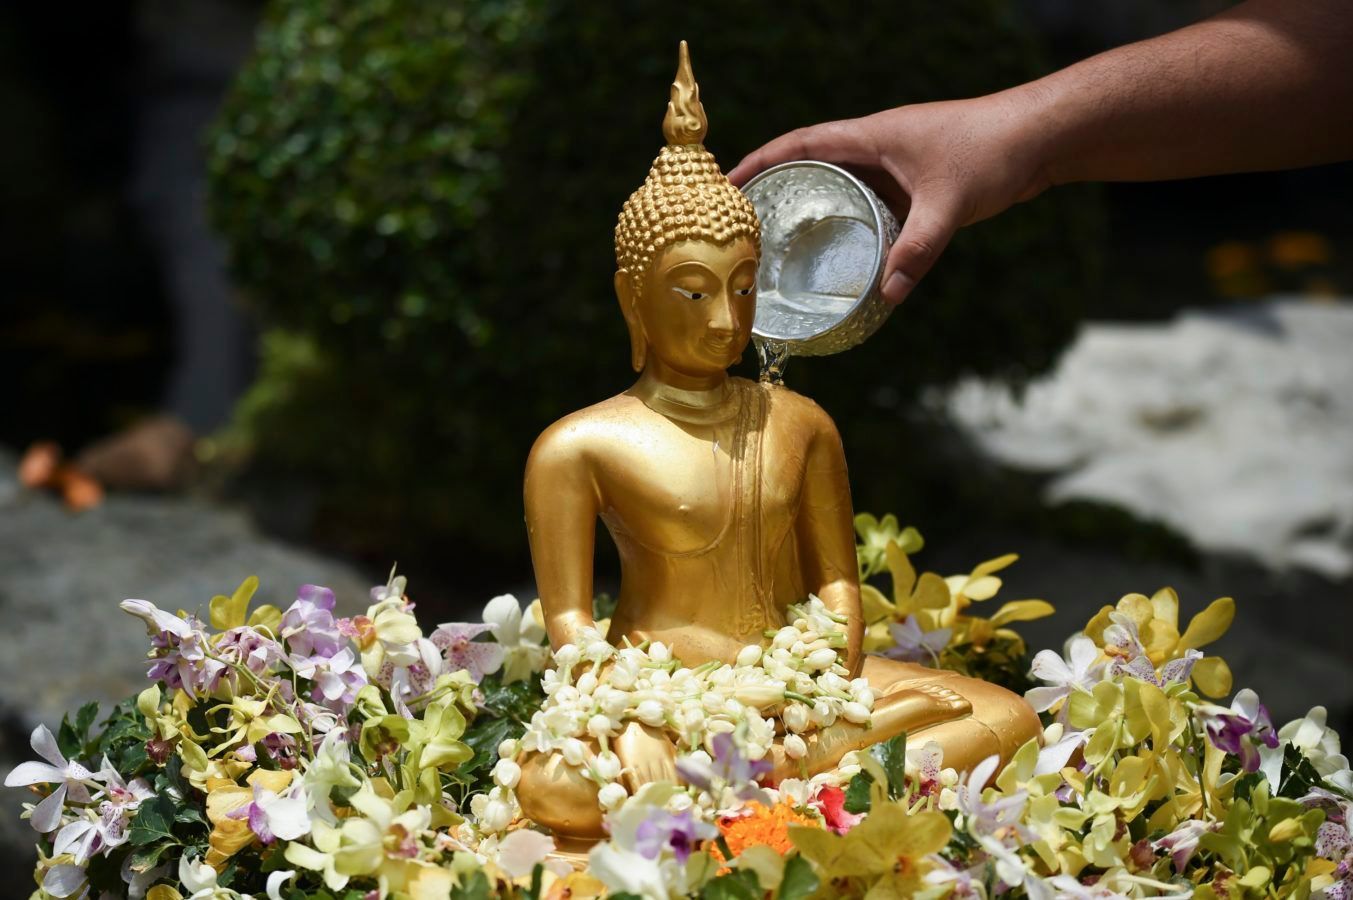 No plan to leave for Bangkok? Here’s where to celebrate Songkran in Malaysia